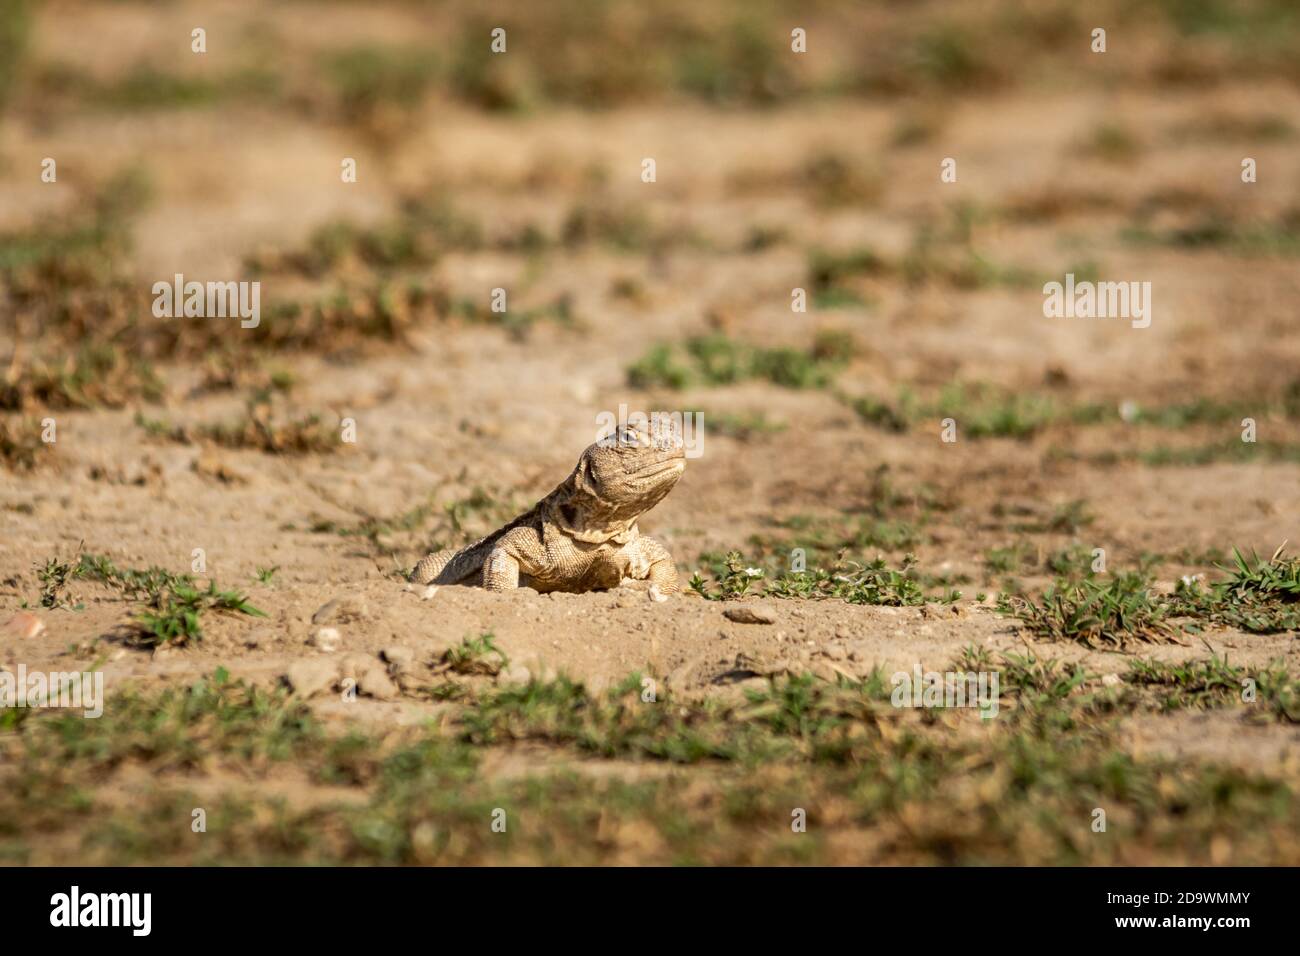 Spiny tailed lizards or Uromastyx emerging from its burrow or bill at tal chhapar sanctuary rajasthan india Stock Photo